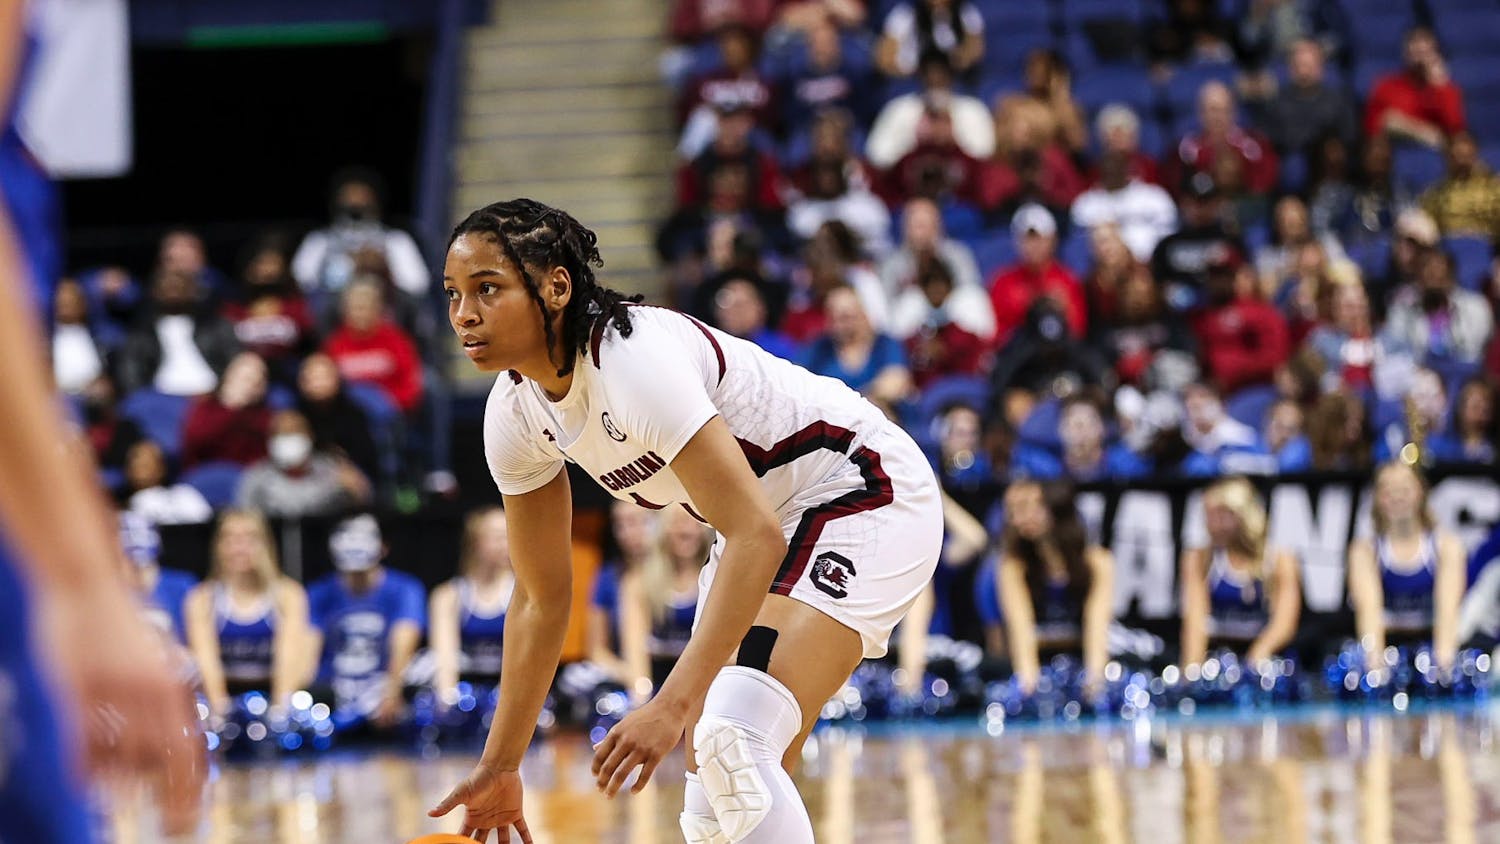 Junior guard Zia Cooke on offense during the third quarter of South Carolina's 80-50 victory over Creighton during the Elite Eight on Sunday, March 27, 2022.